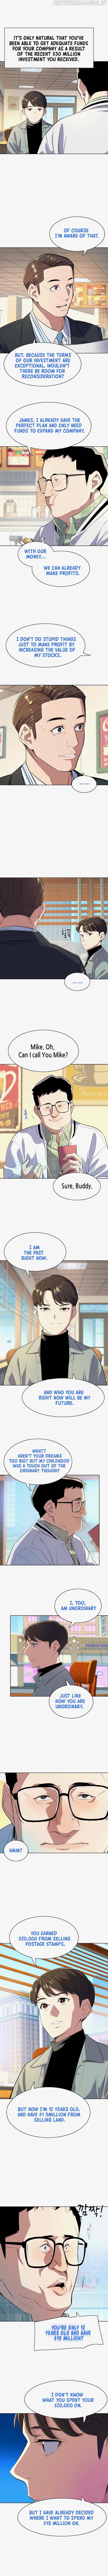 The Chaebeol’s Youngest Son chapter 9